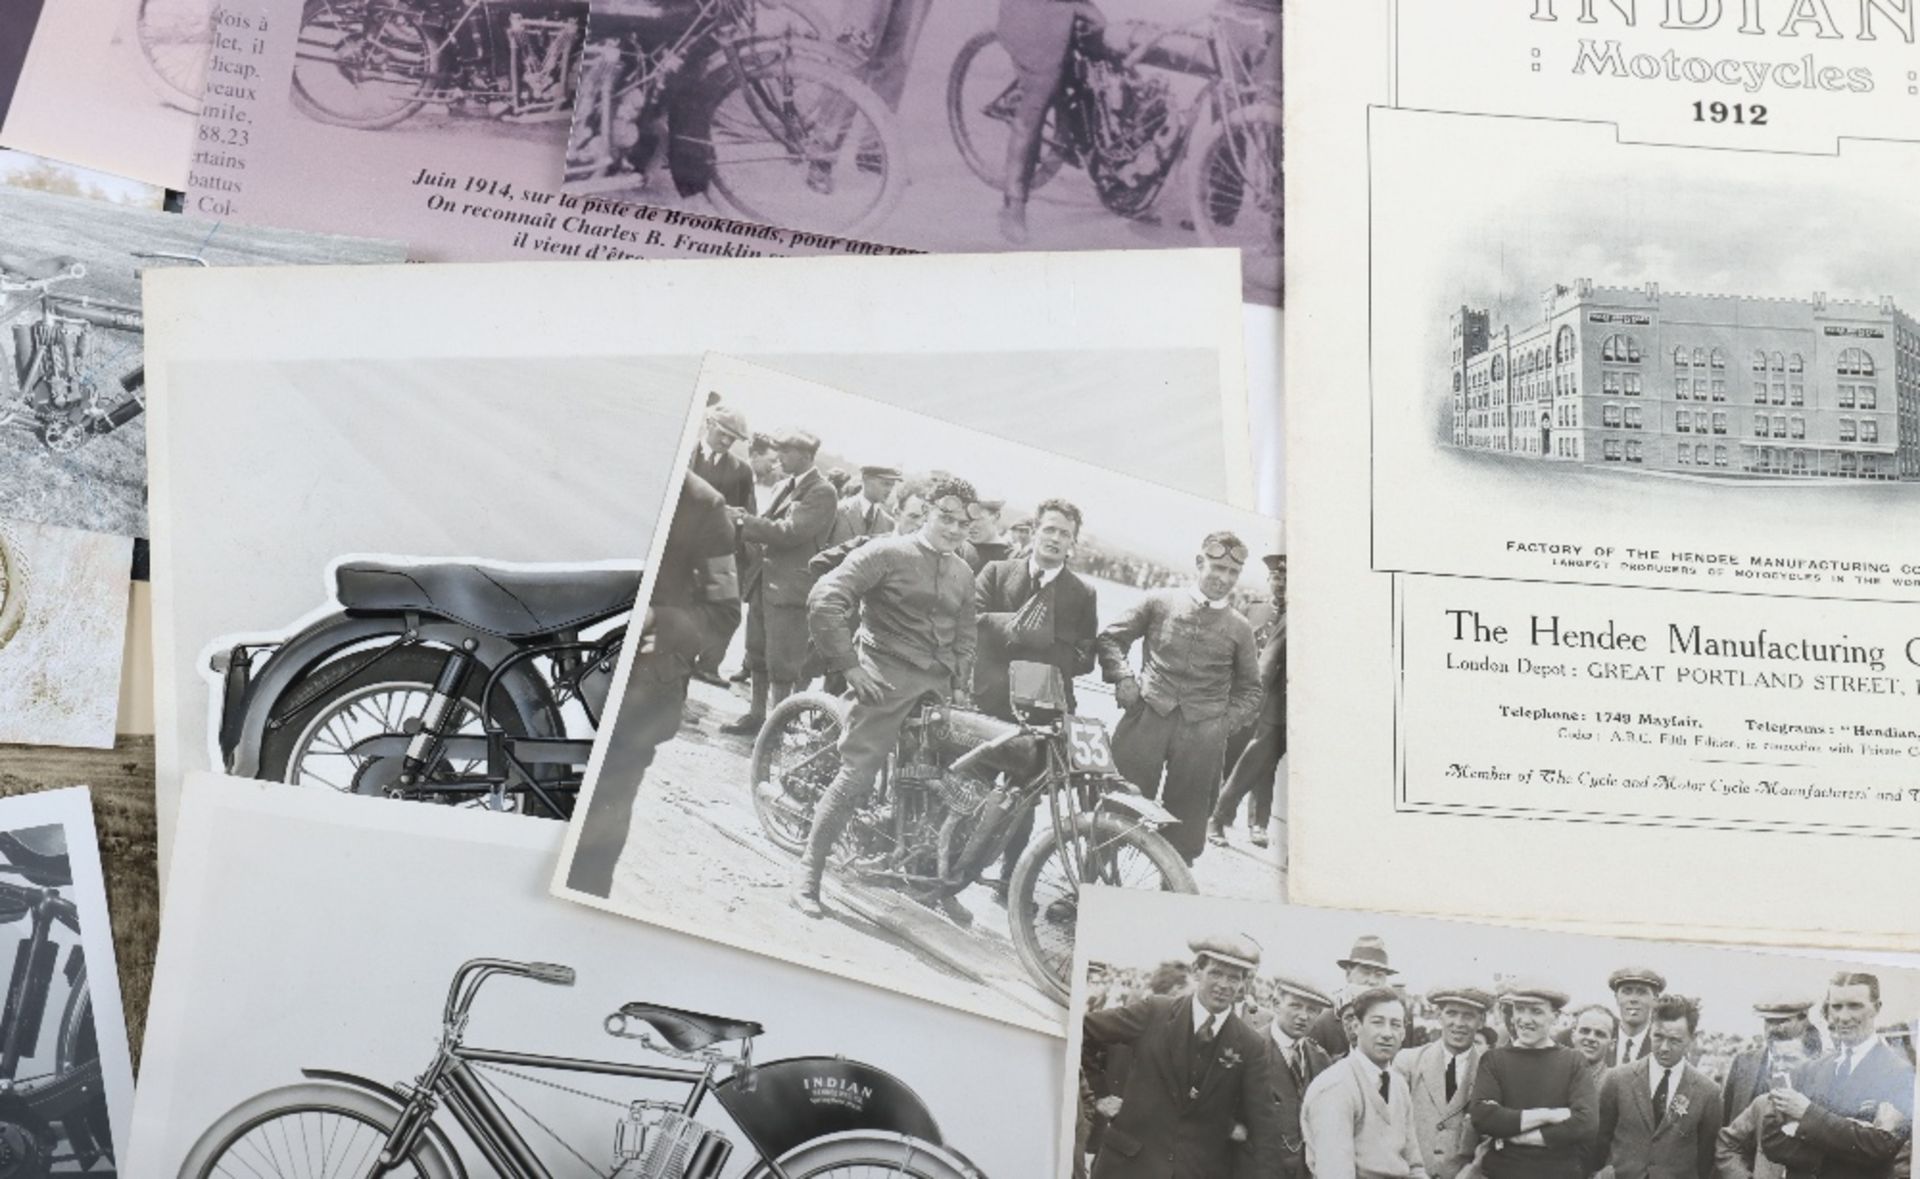 Motorcycling and cycling ephemera for Indian Motorcycles, early 20th century - Image 5 of 5